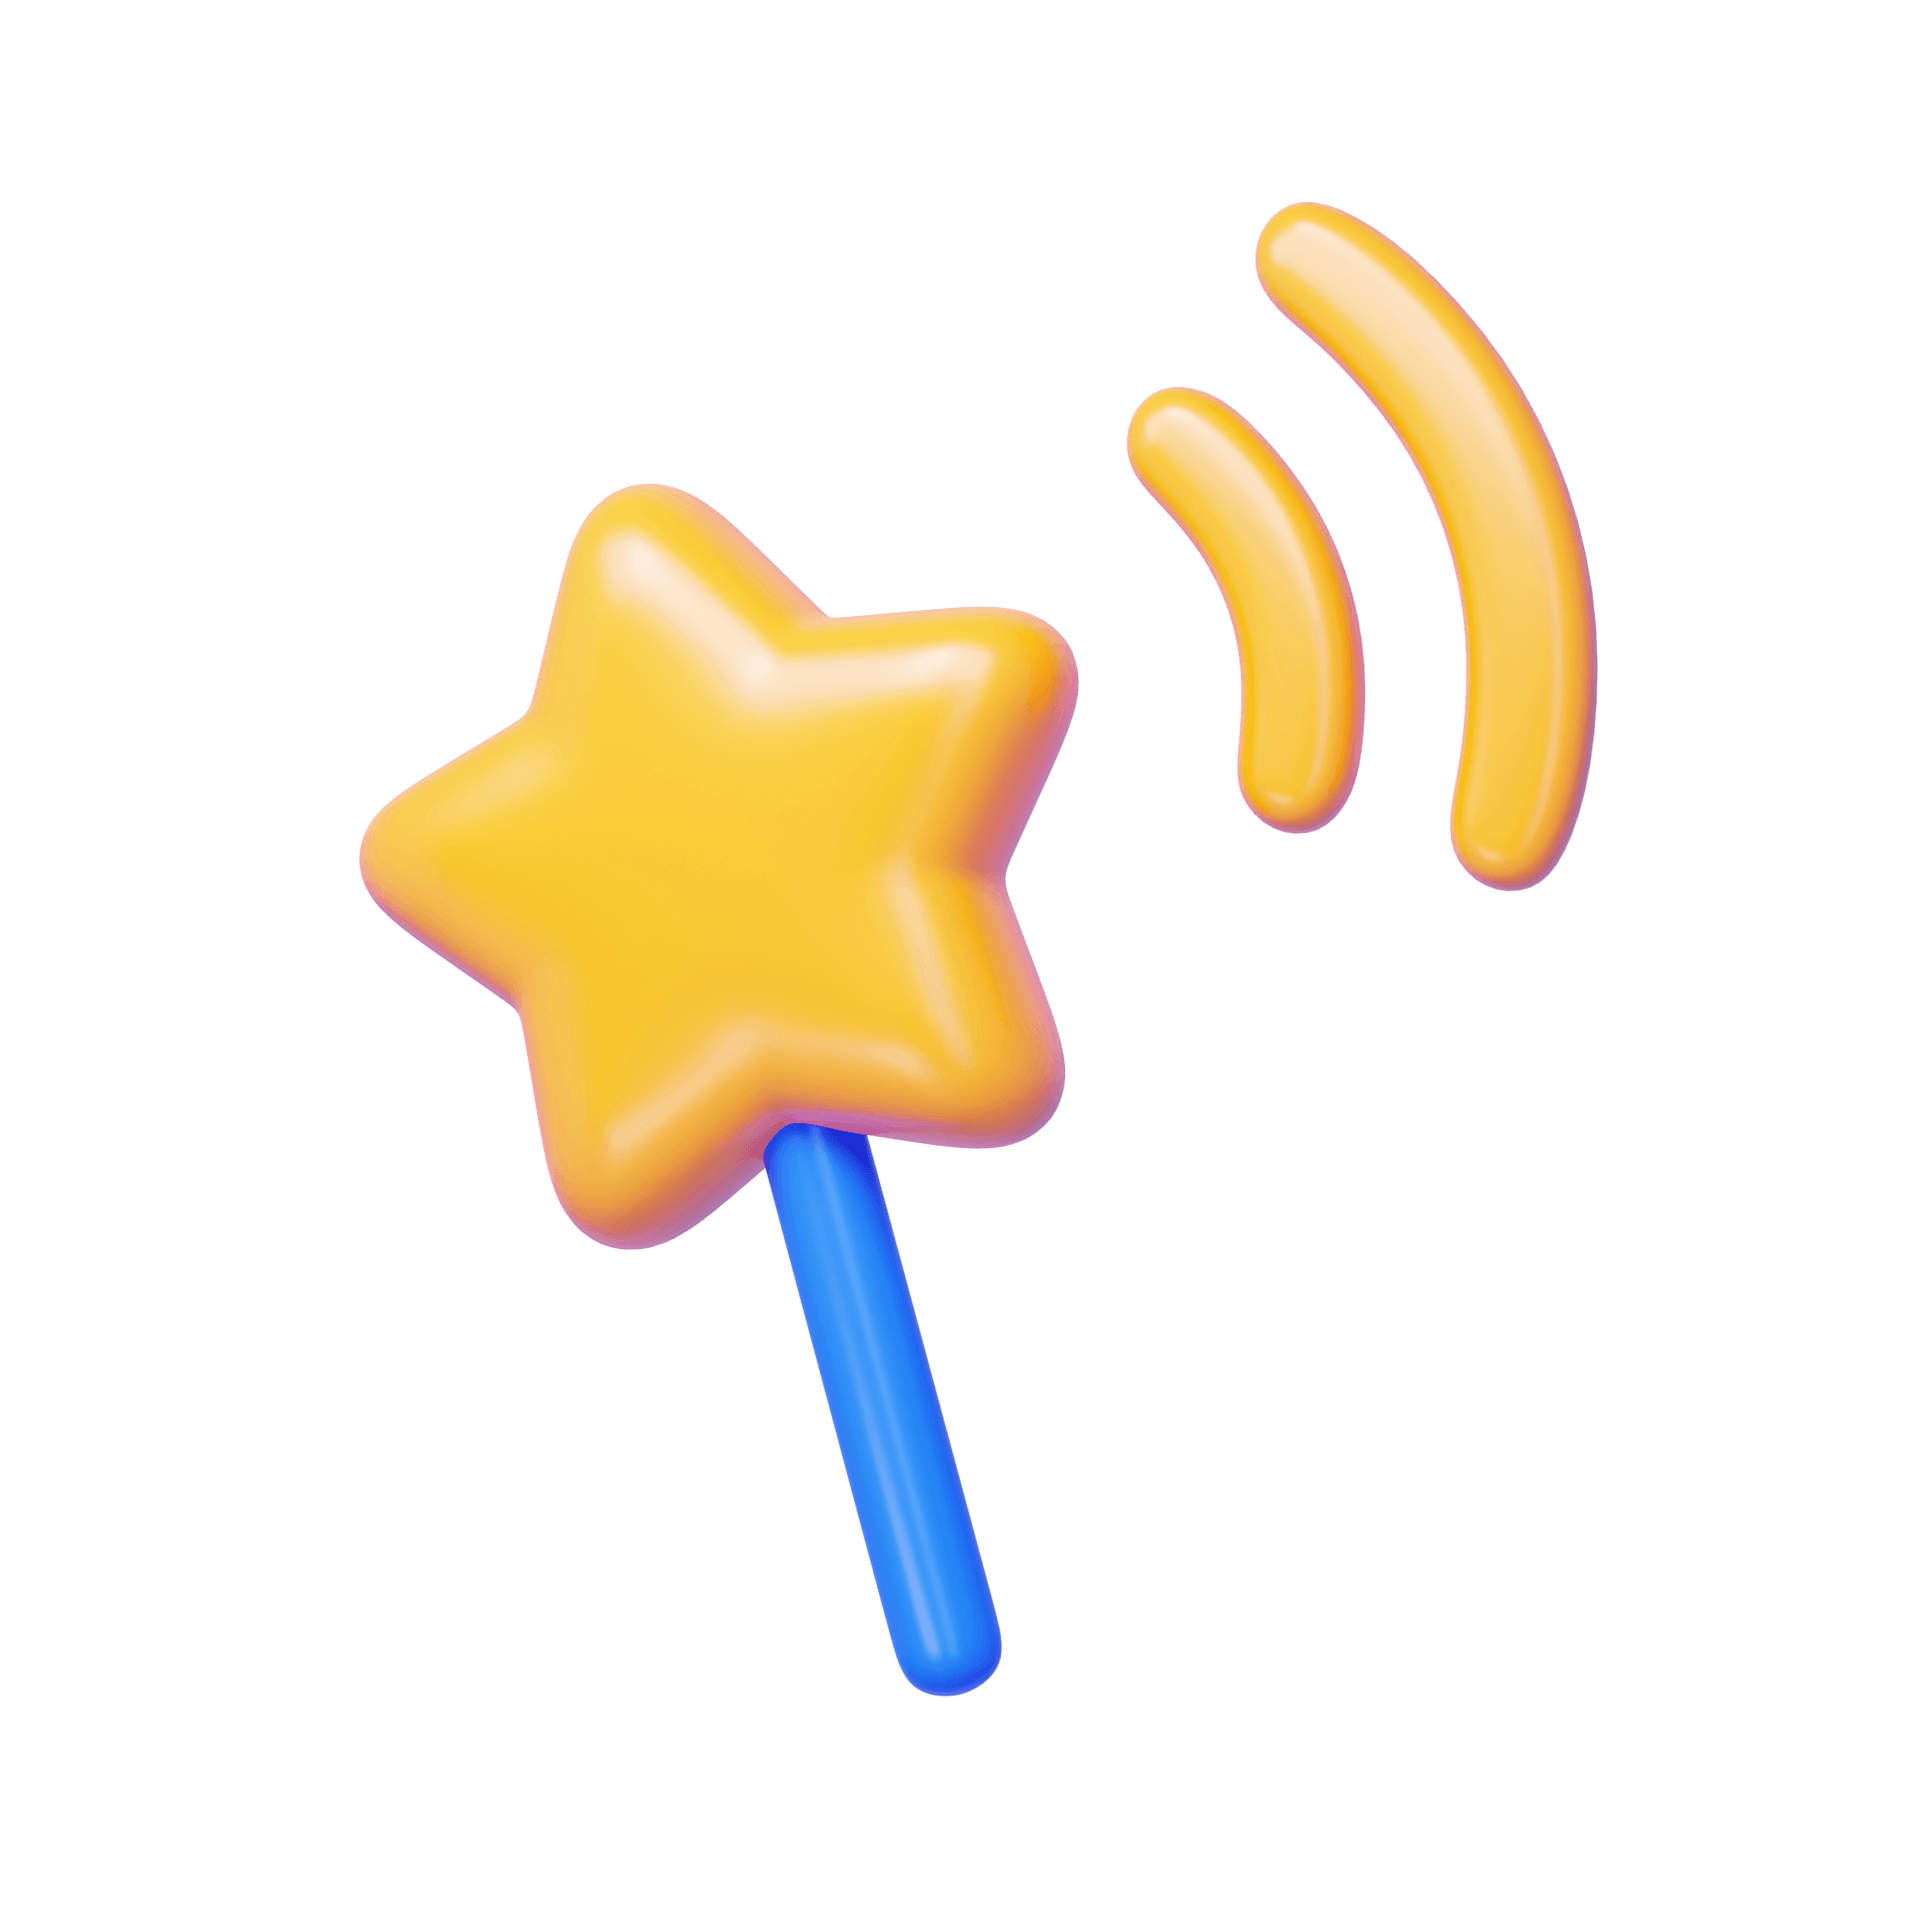 A yellow star shaped wand with a blue stick on a white background.